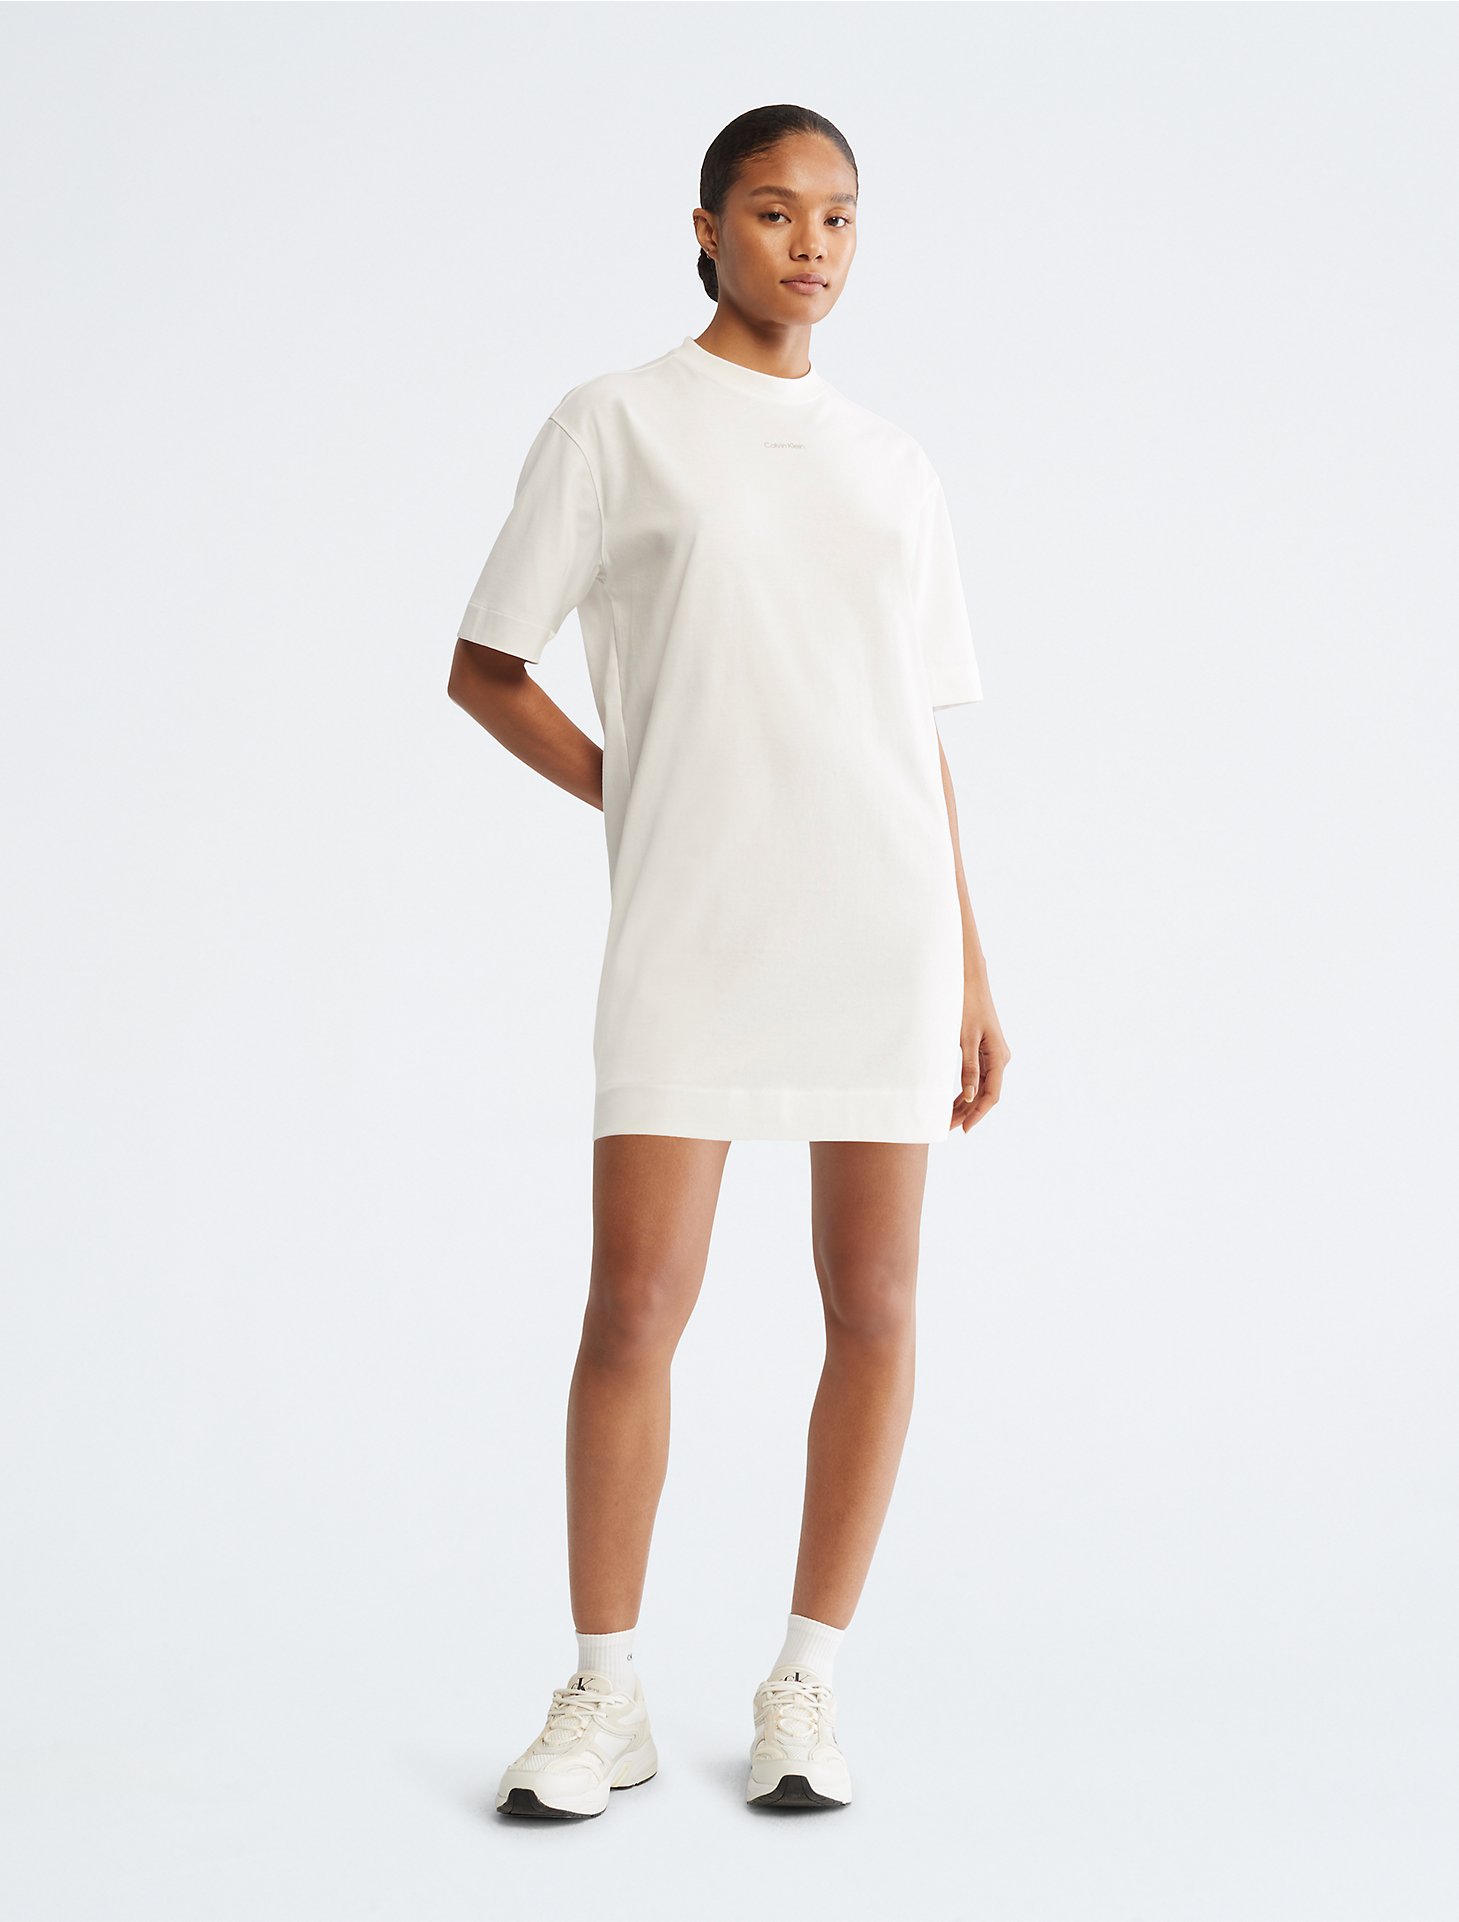 CK Sport Athletic Relaxed Fit T-Shirt Dress